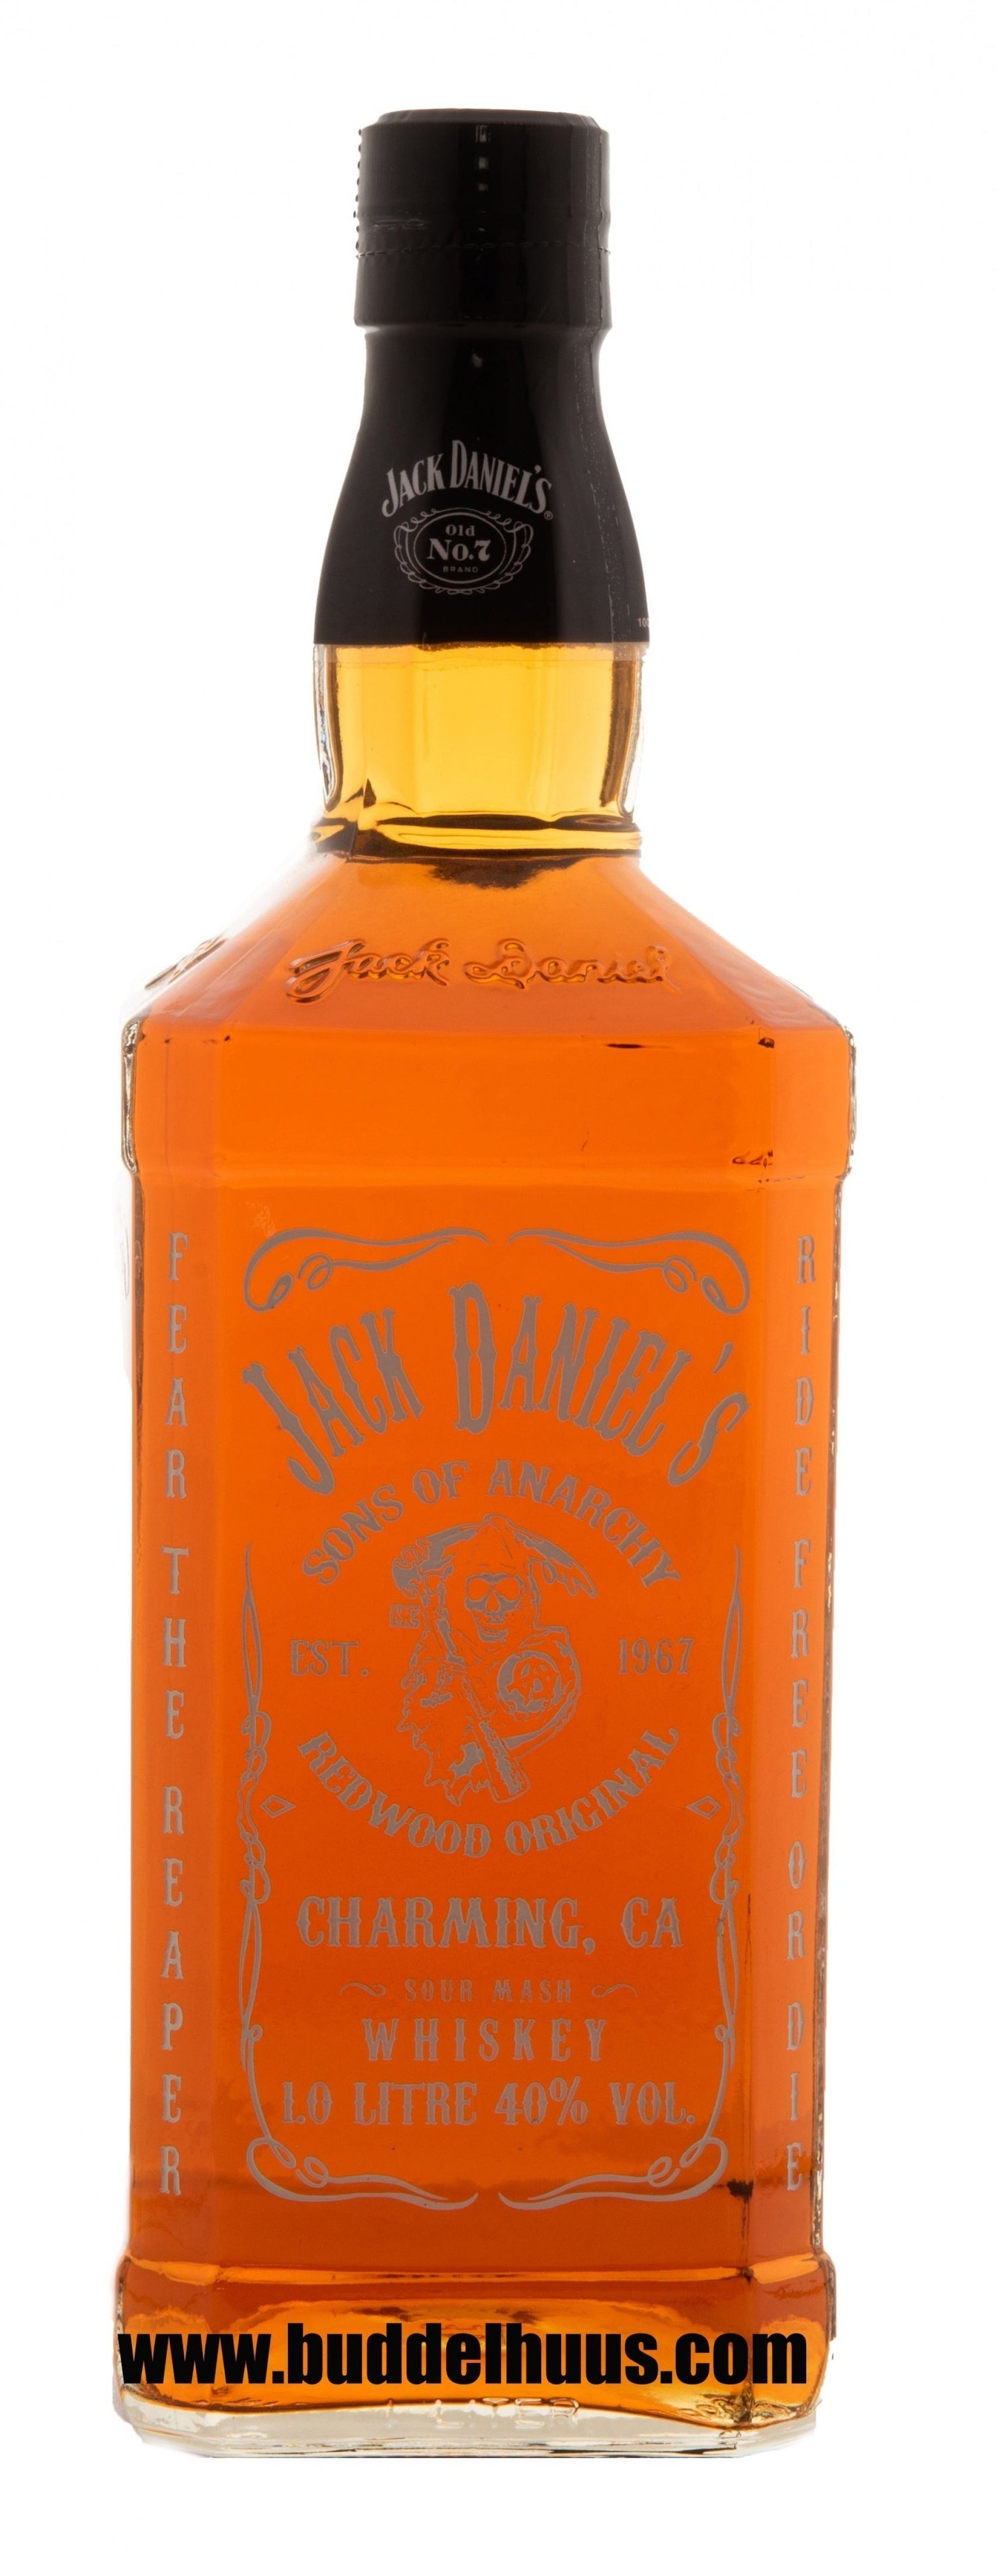 Jack Daniel's Old No. 7 Special Edition Sons of Anarchy